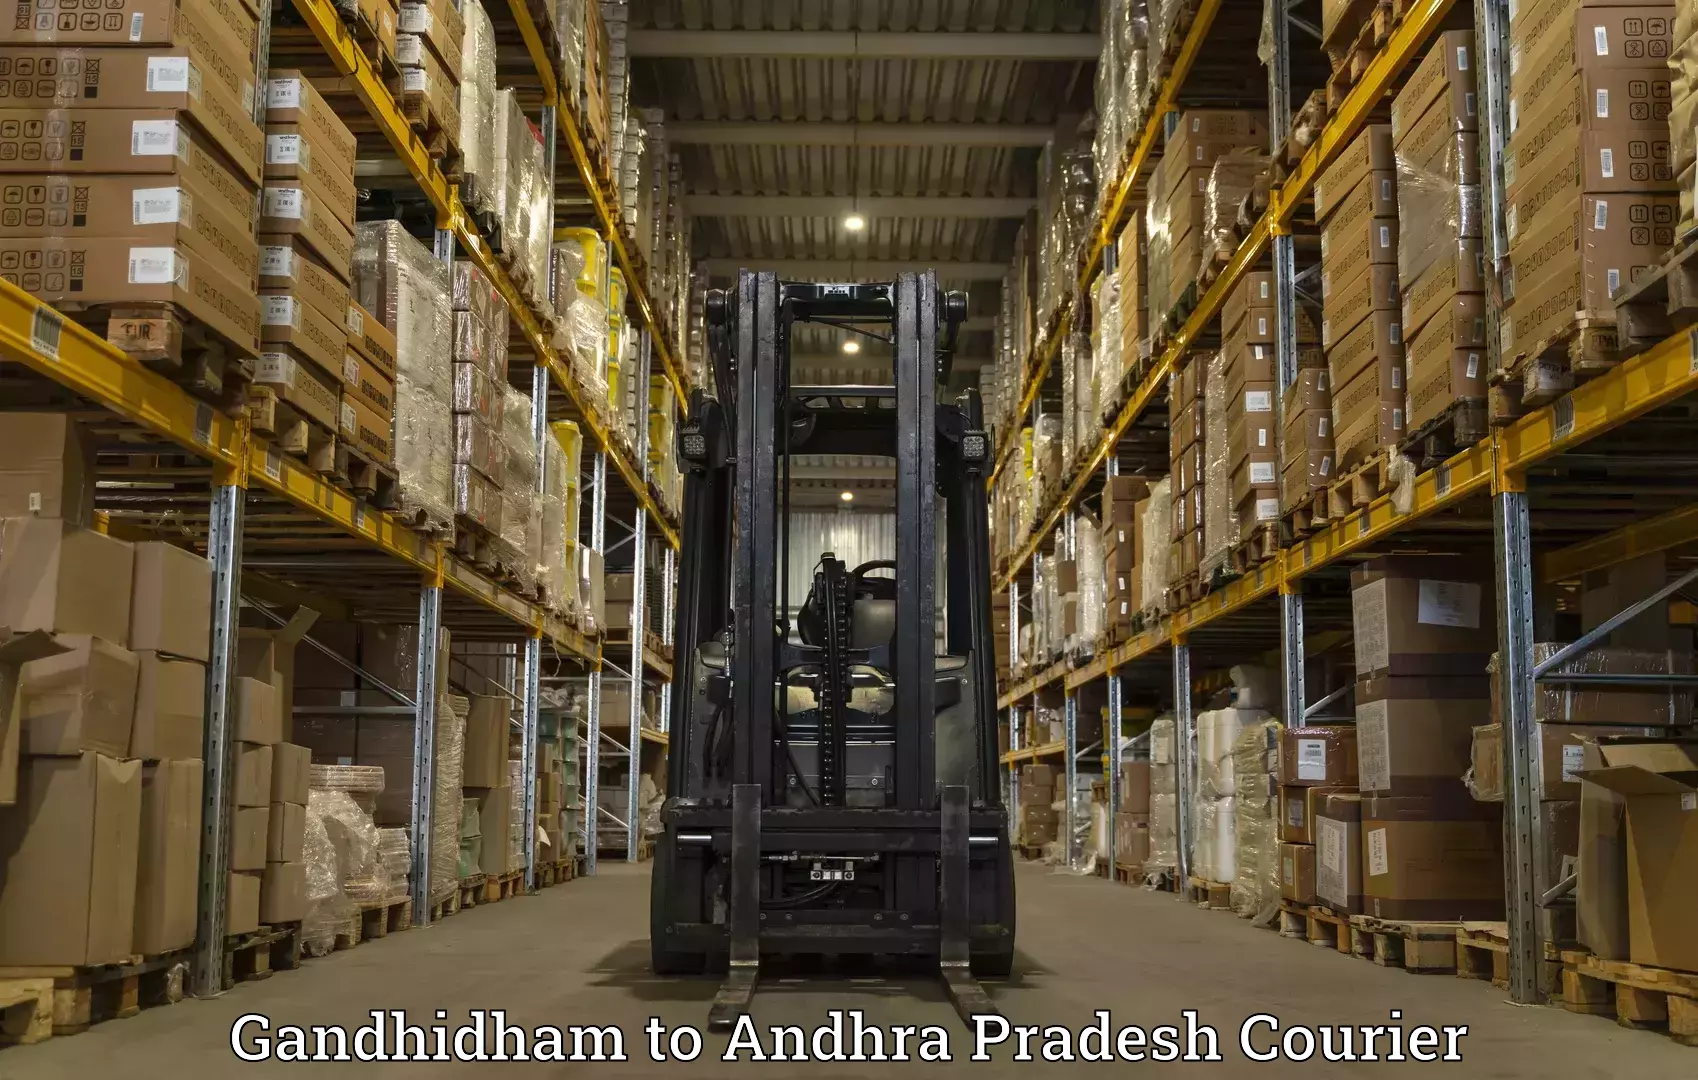 Professional delivery solutions in Gandhidham to Visakhapatnam Port